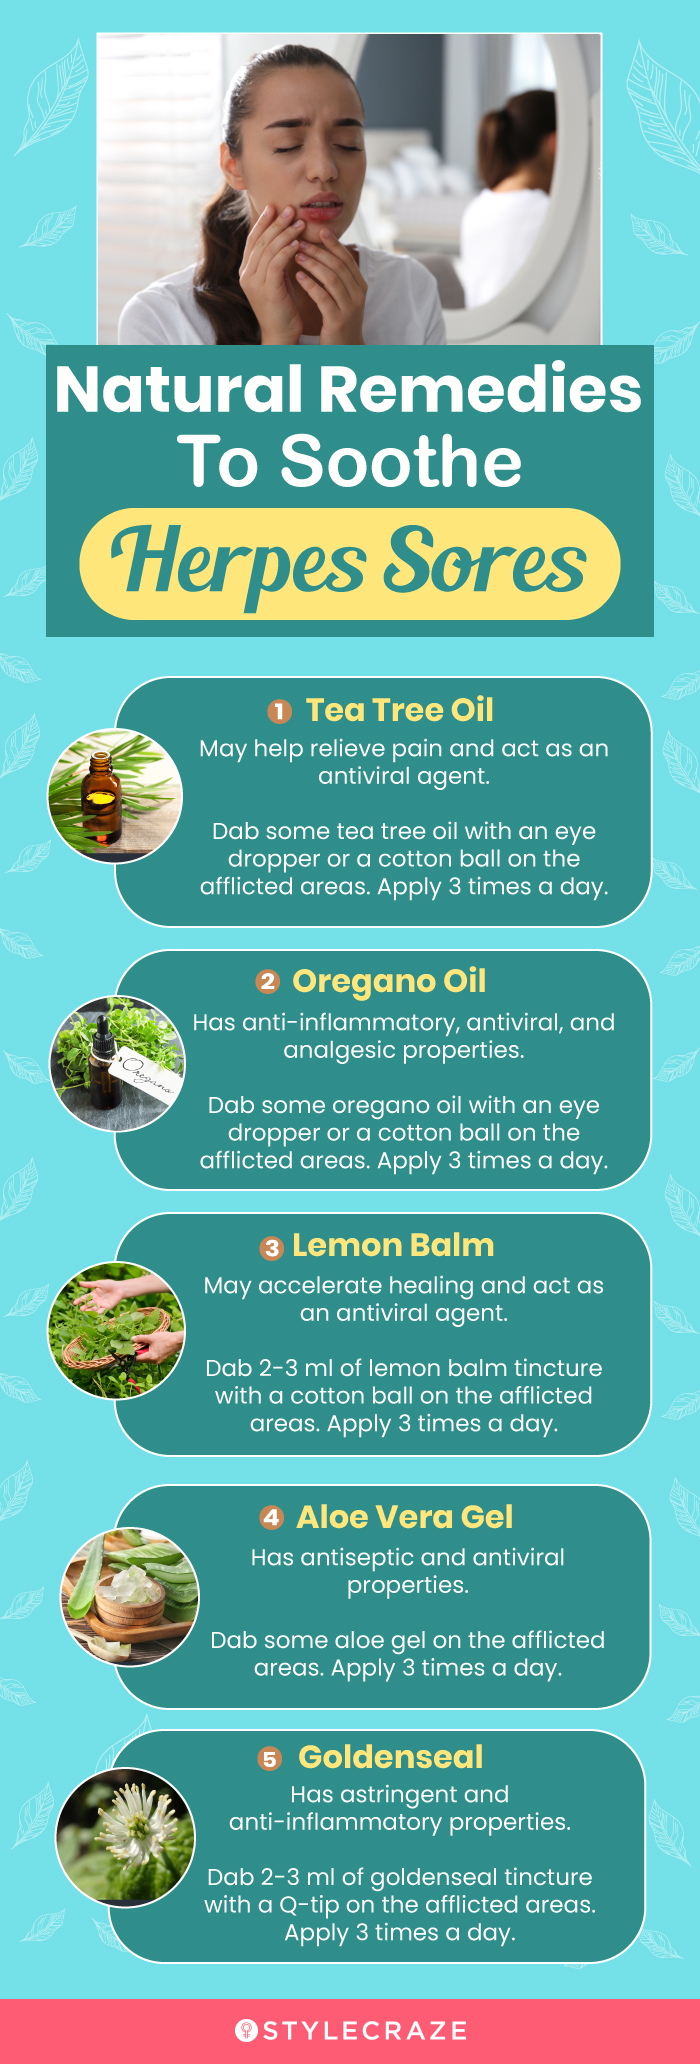 natural remedies to soothe herpes sores (infographic)